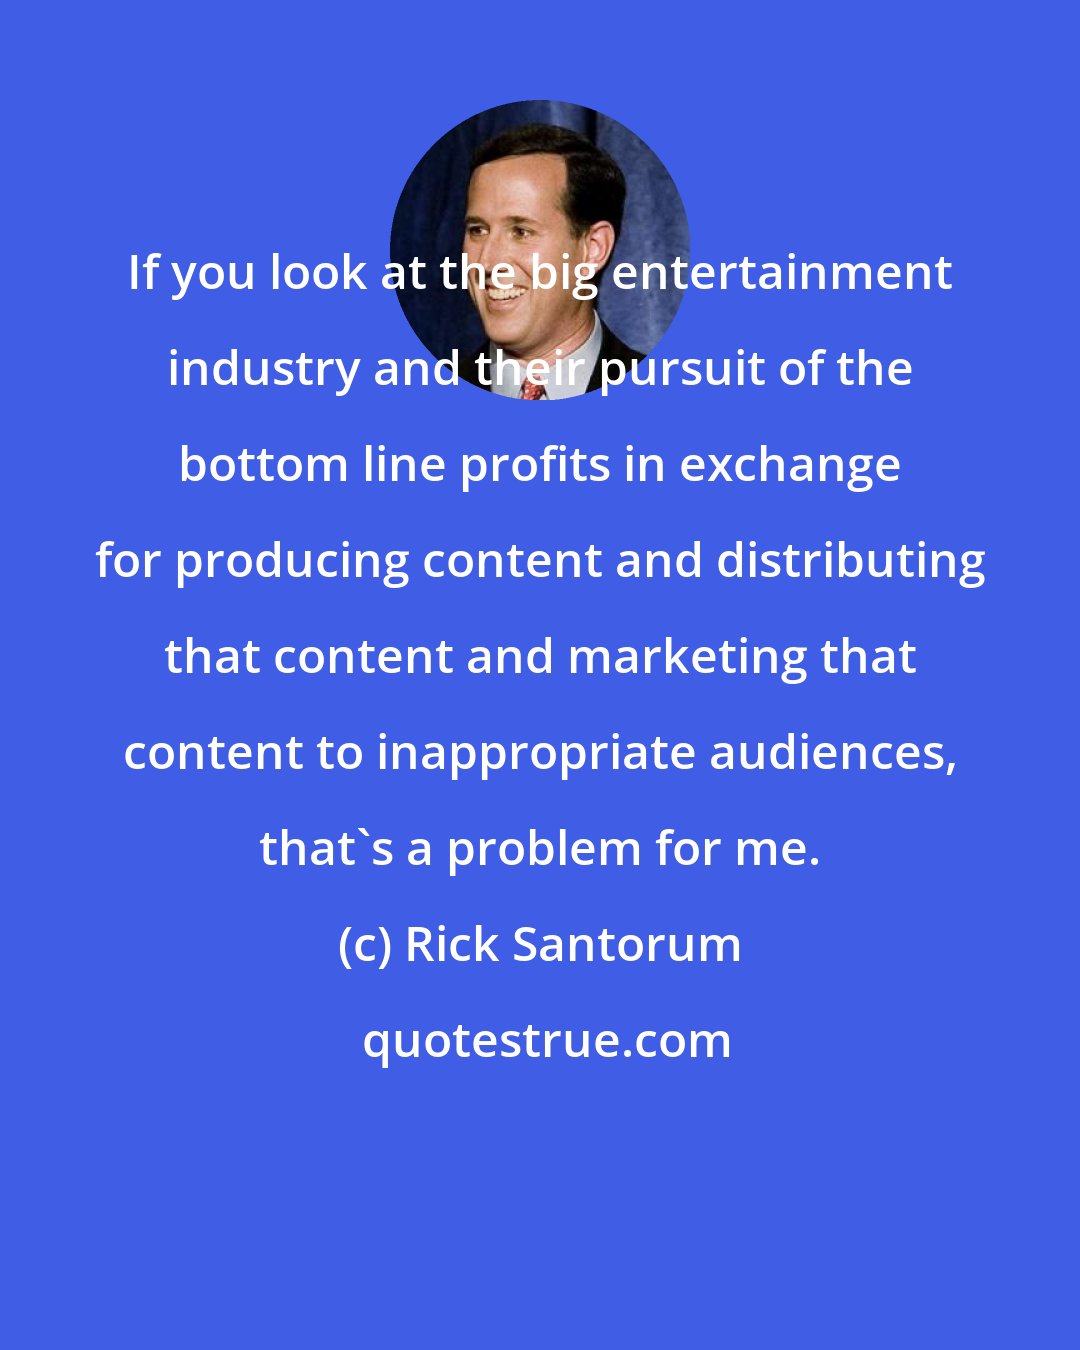 Rick Santorum: If you look at the big entertainment industry and their pursuit of the bottom line profits in exchange for producing content and distributing that content and marketing that content to inappropriate audiences, that's a problem for me.